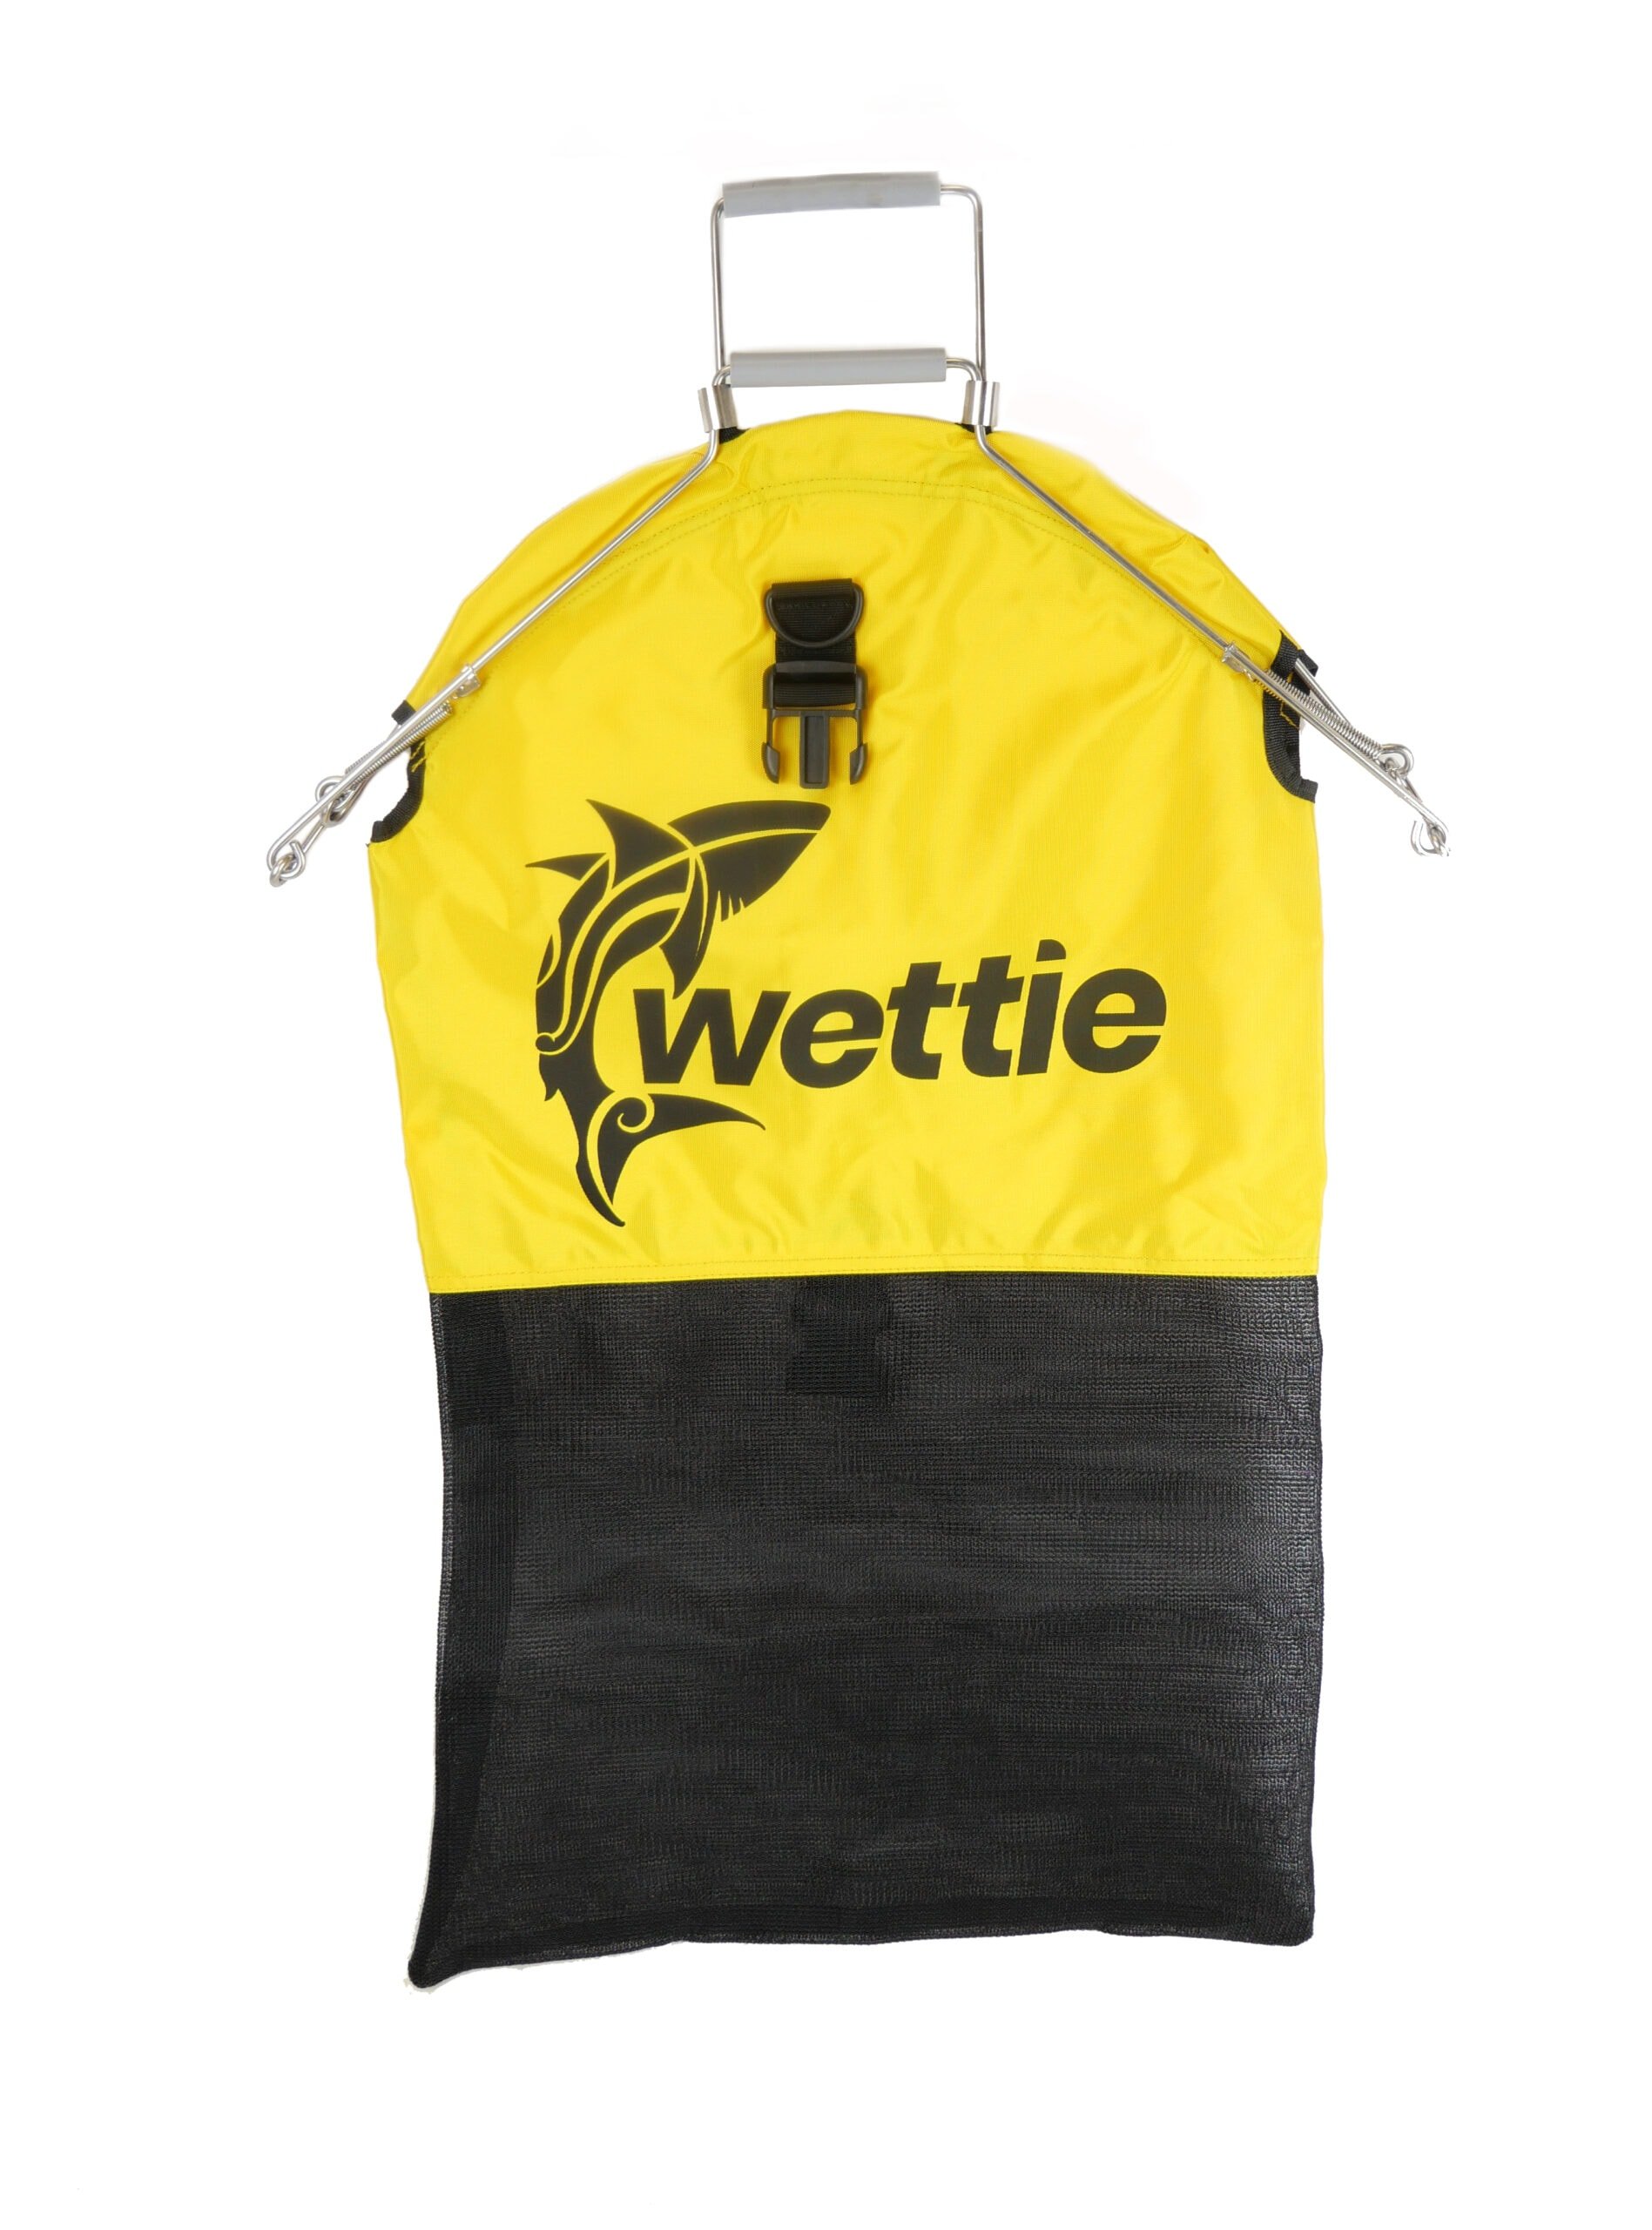 BAGS - Wettie NZ  Spearfishing Wetsuits & Dive Equipment